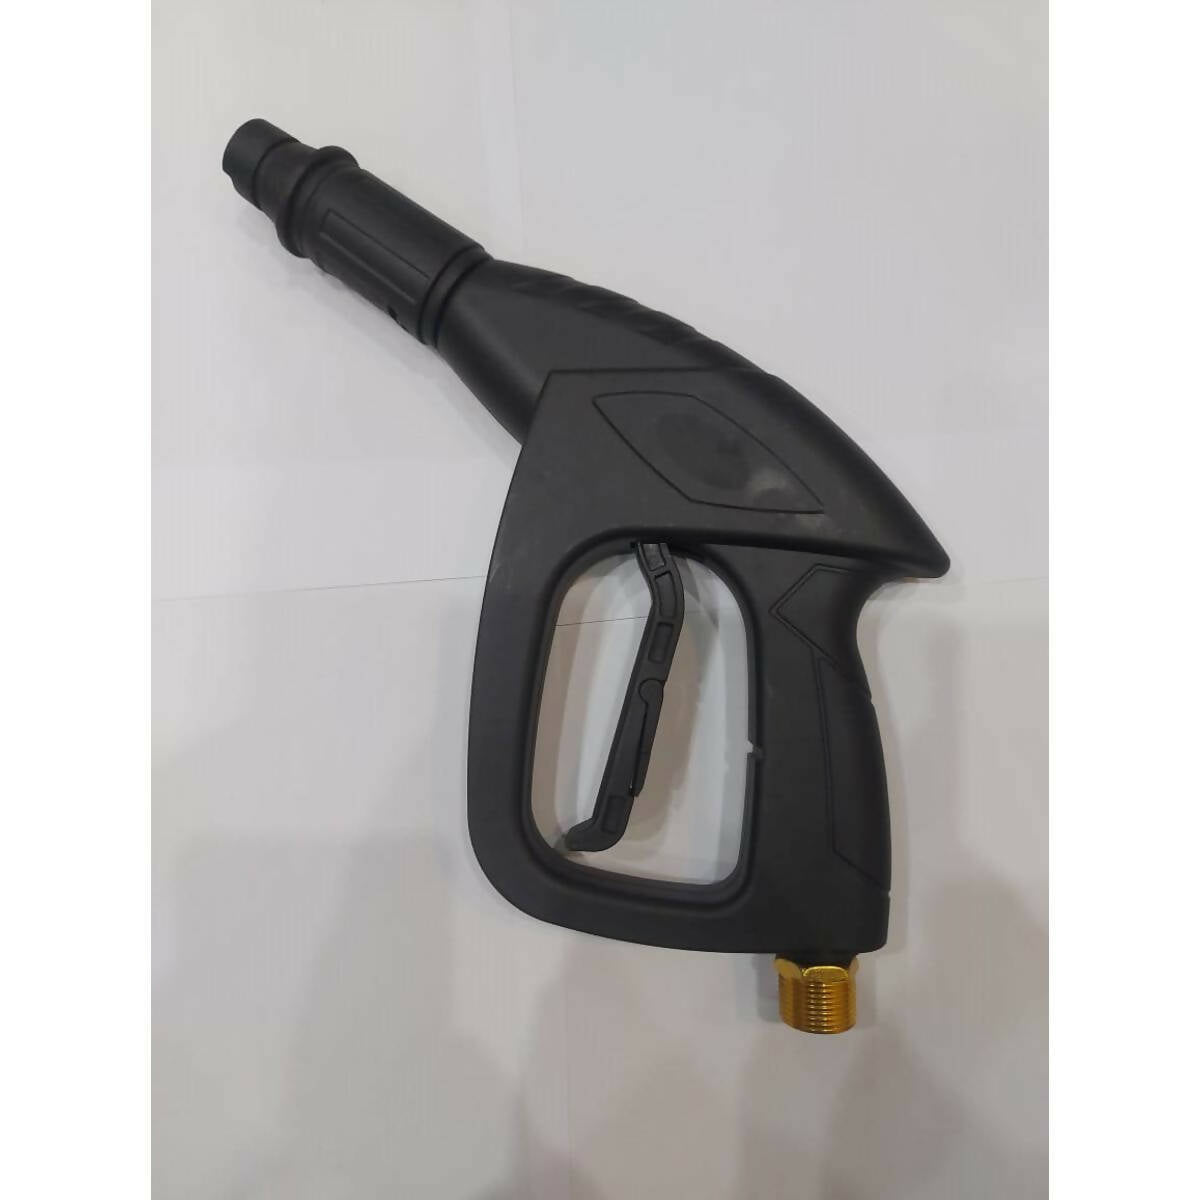 Short Gun for Pressure Washers with adjustable spray nozzle - M22 Connector